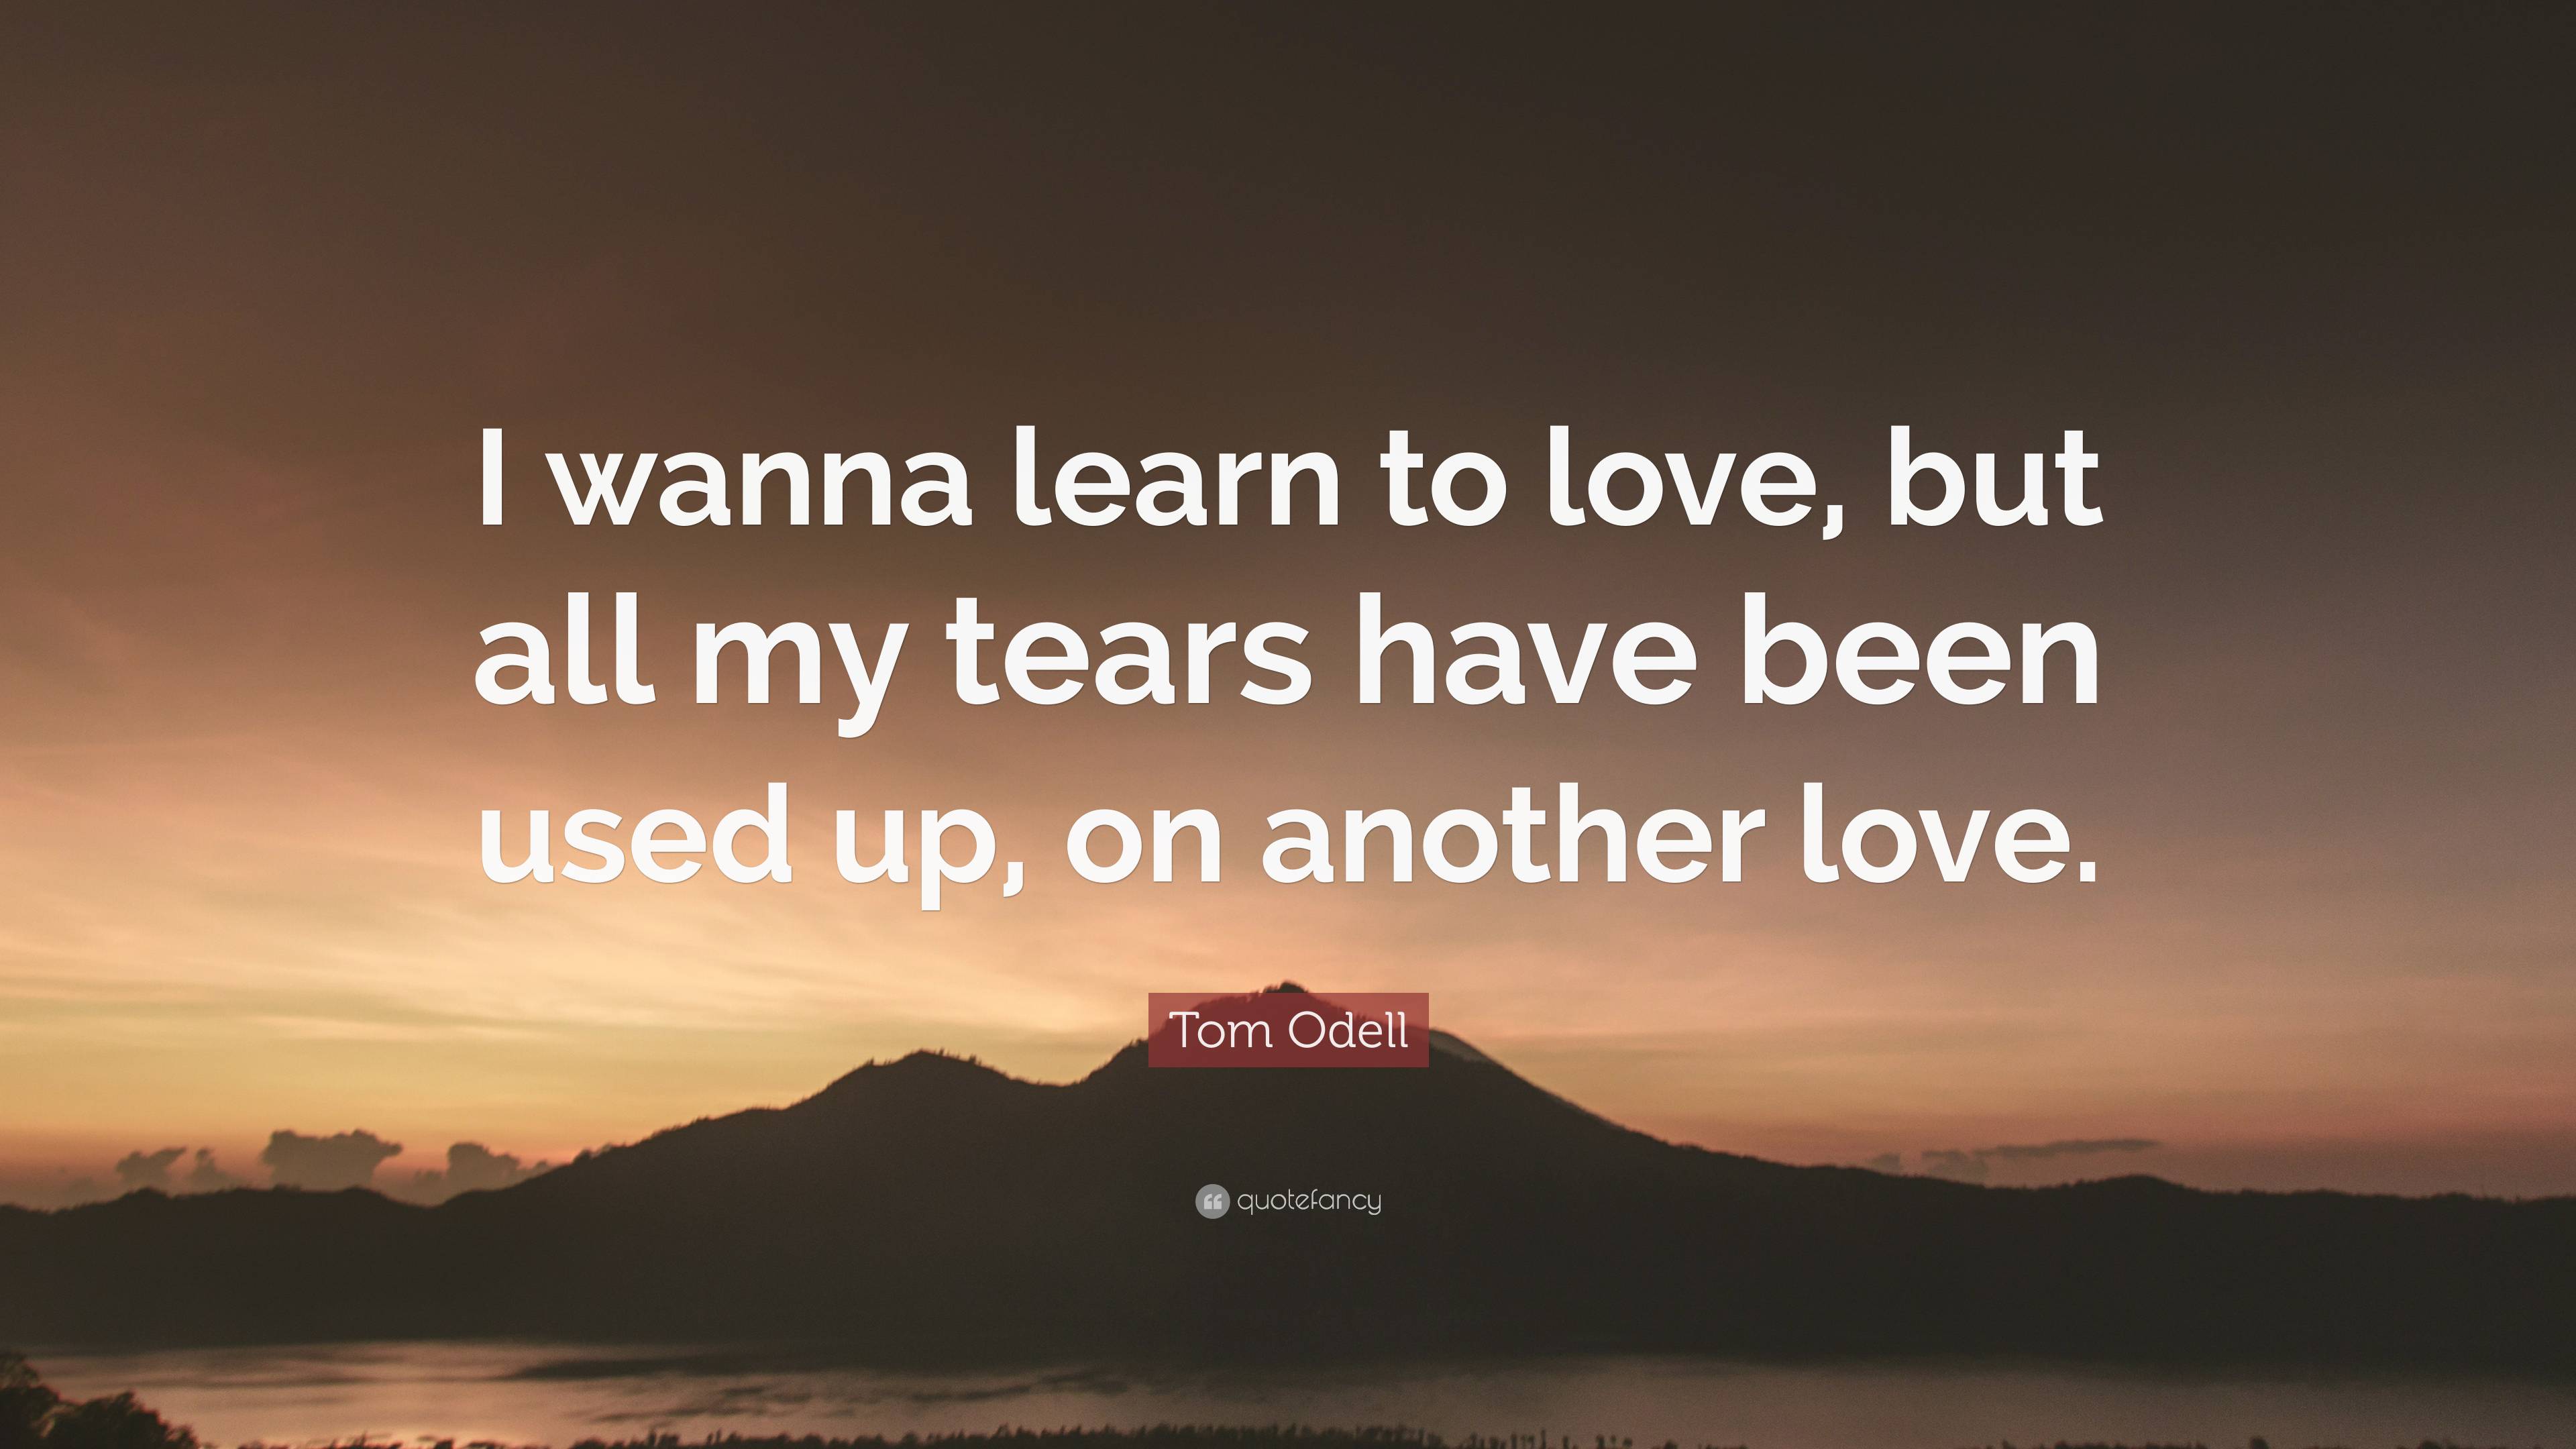 All my tears have been used up on another love. - Tom Odell